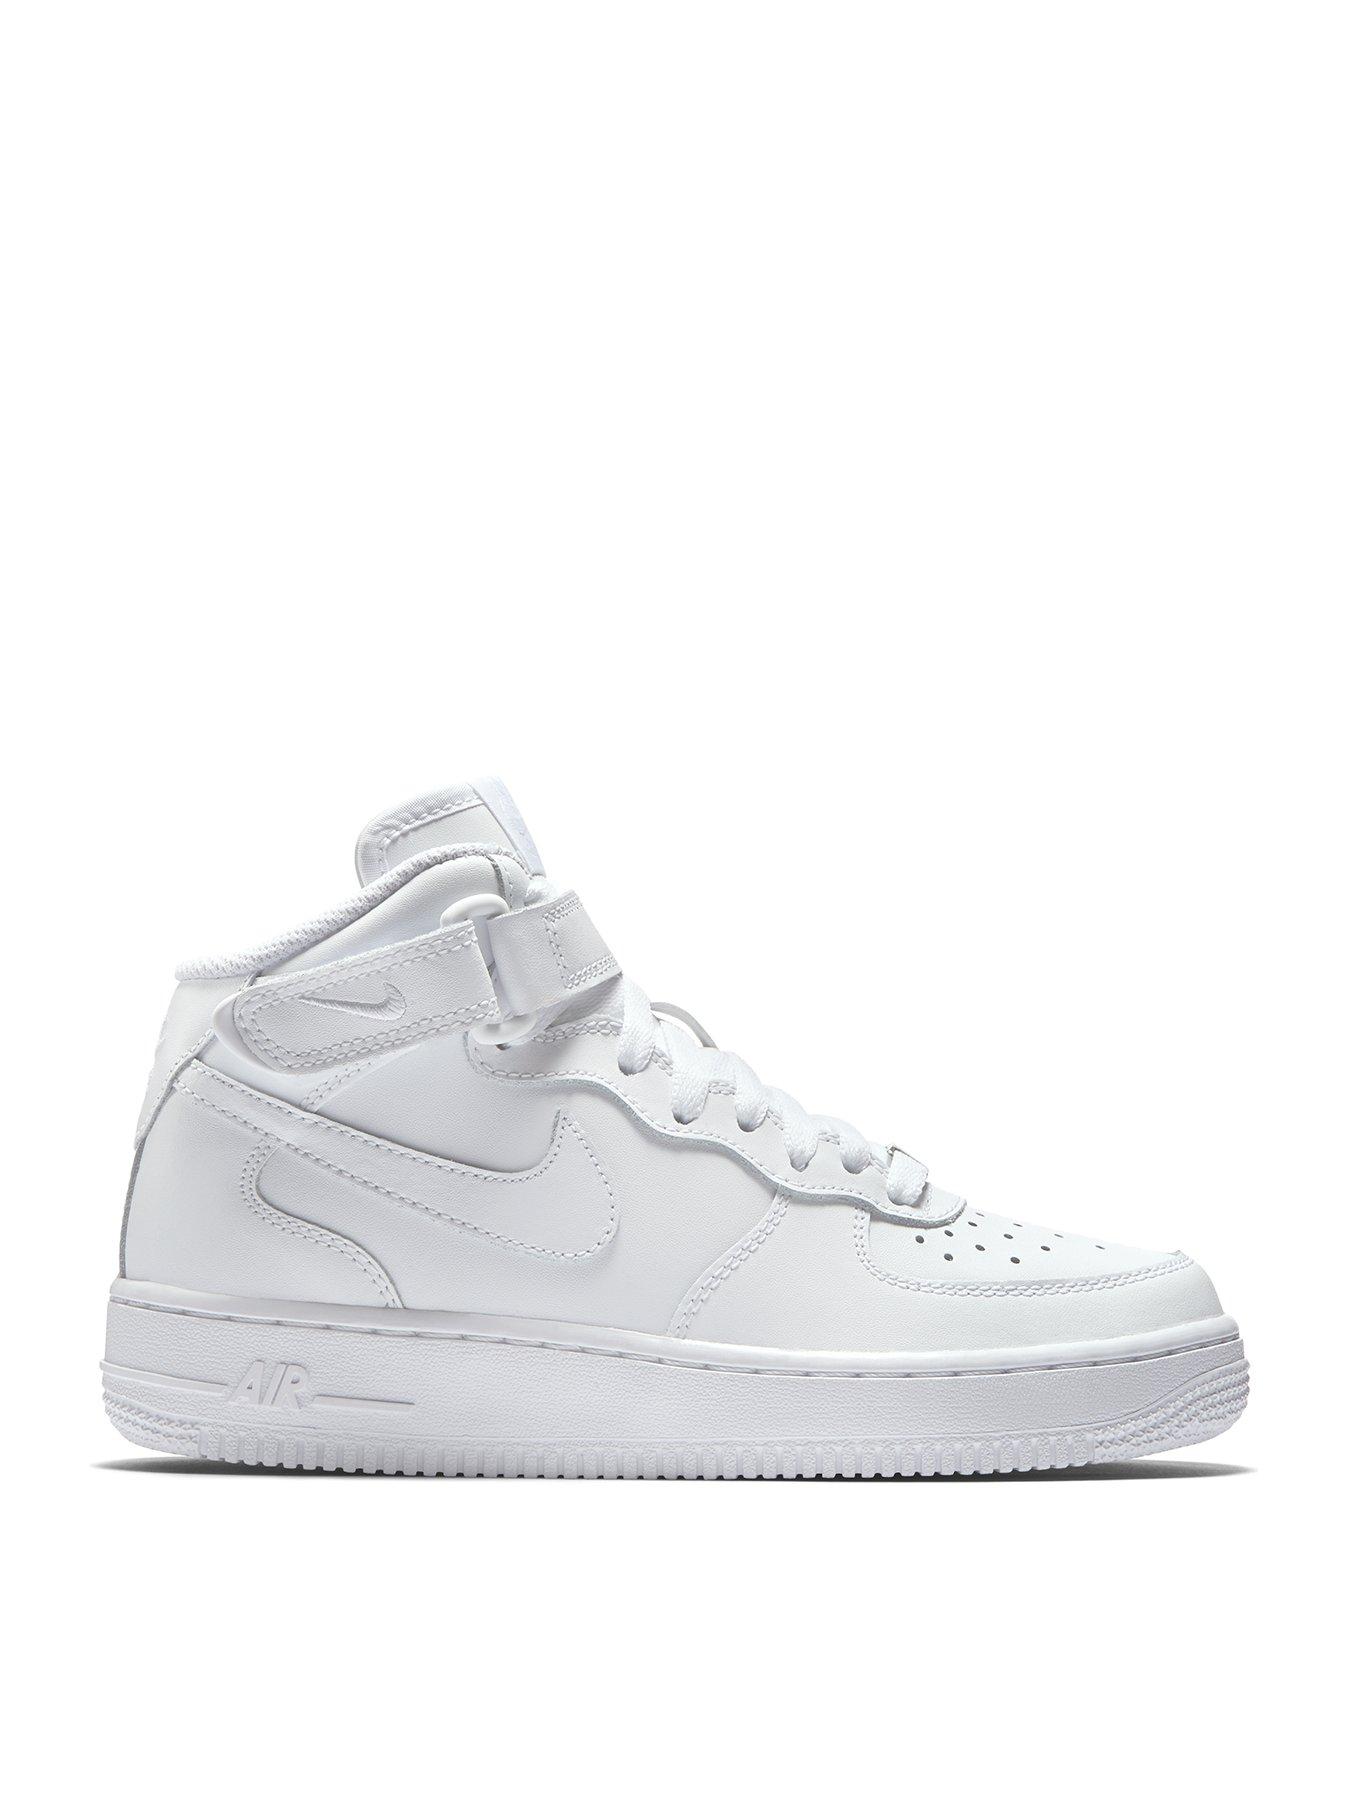 Nike Air Force 1 Mid 06 Junior Trainer 